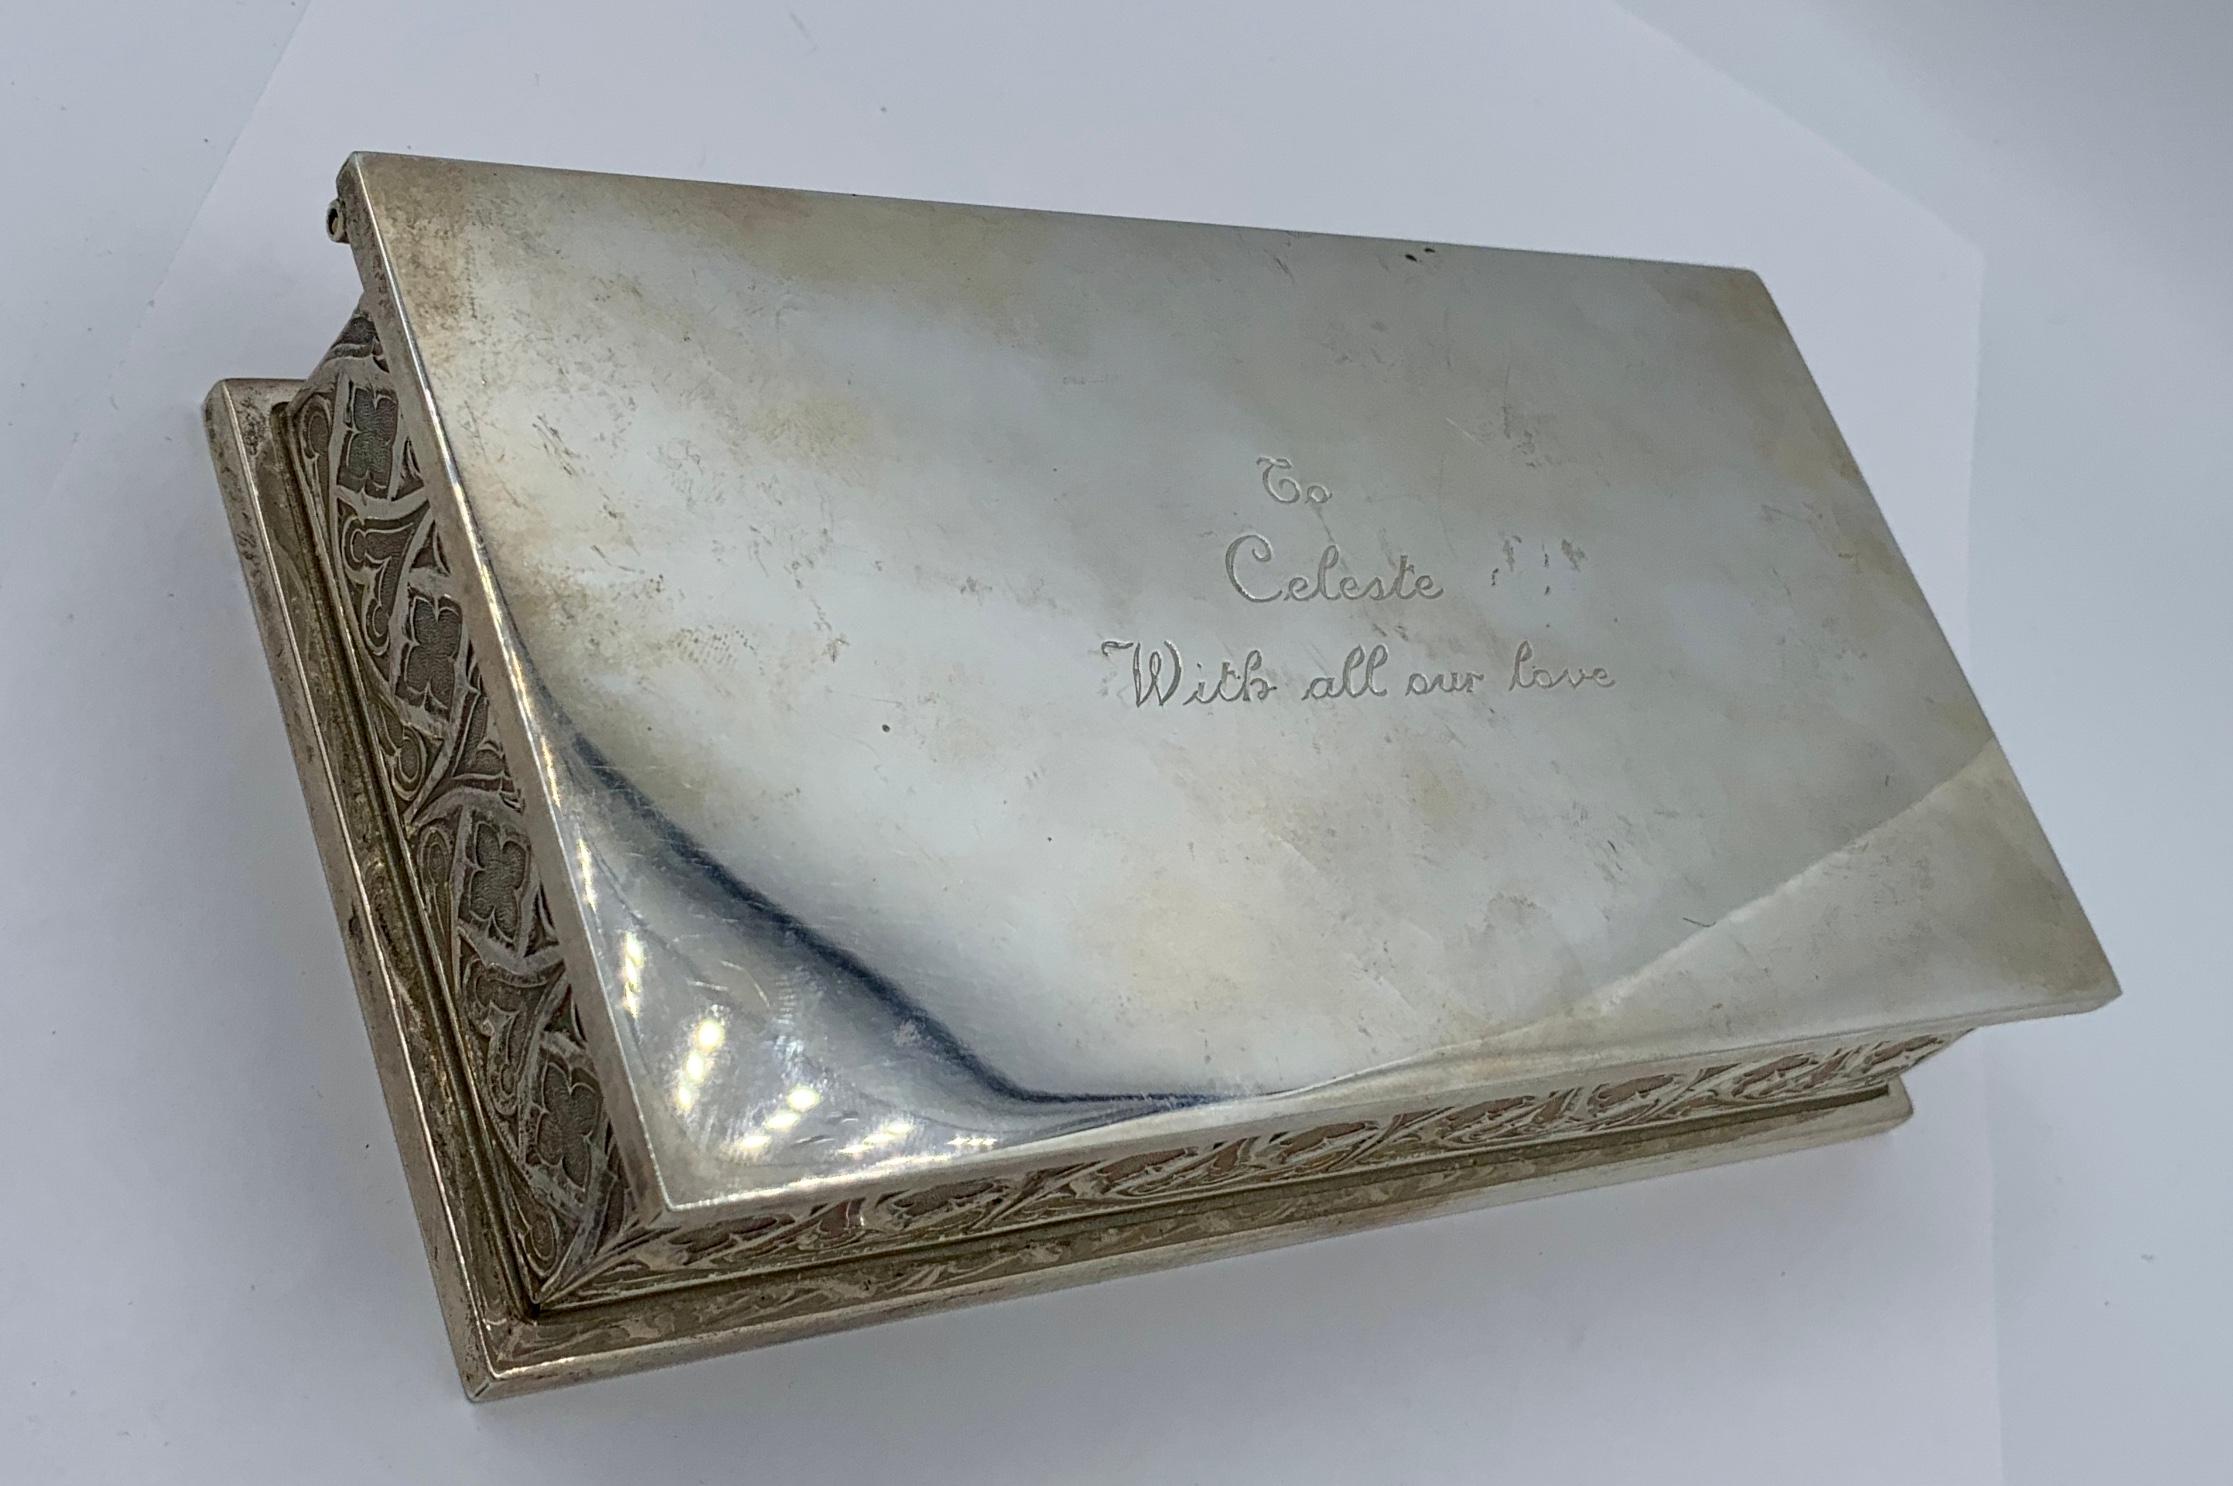 Celeste Holm Tiffany Jewelry Box Signed from Cast of Soap Opera Loving Sterling In Good Condition For Sale In New York, NY